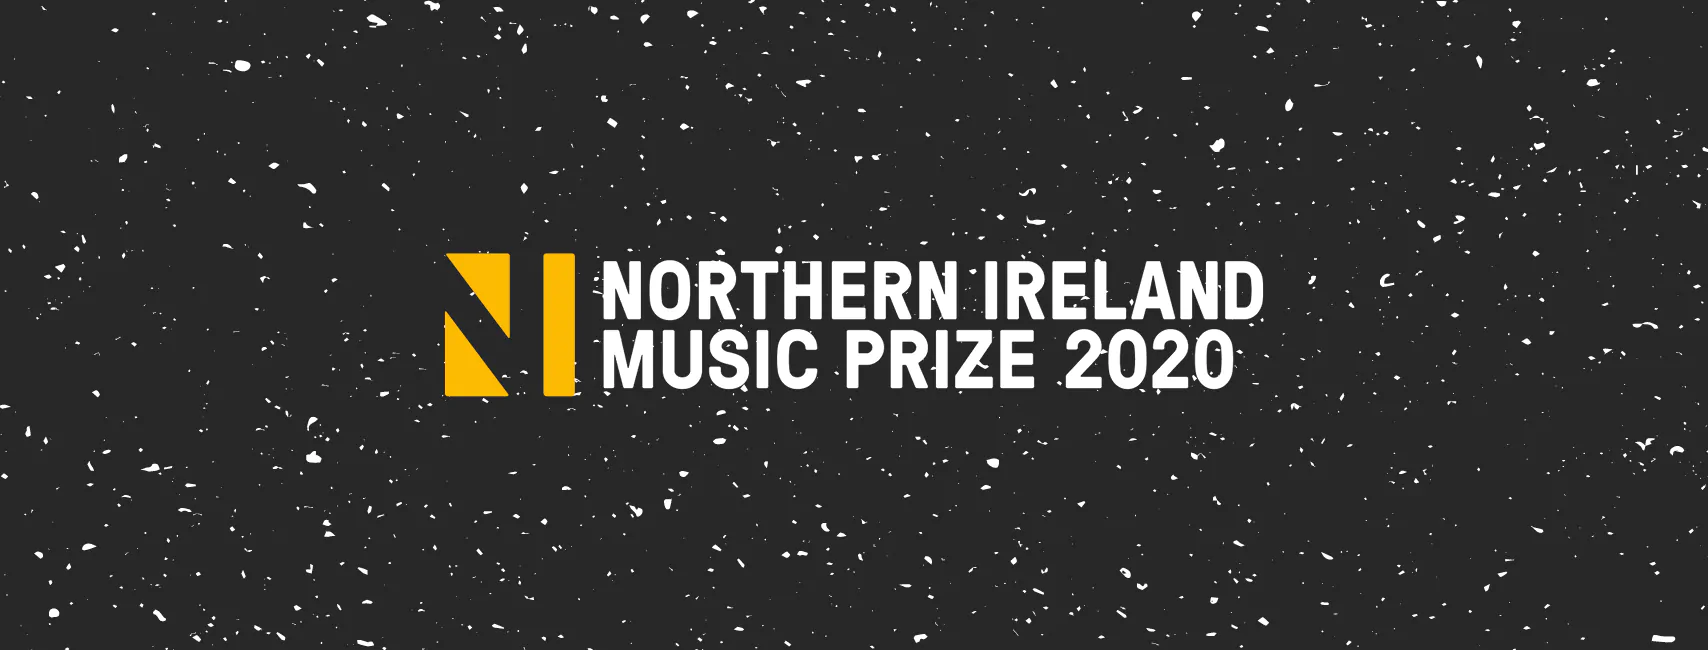 NI MUSIC PRIZE 2020 Confirmed for Thursday November 12th @ 8pm as part of Sound of Belfast 2020